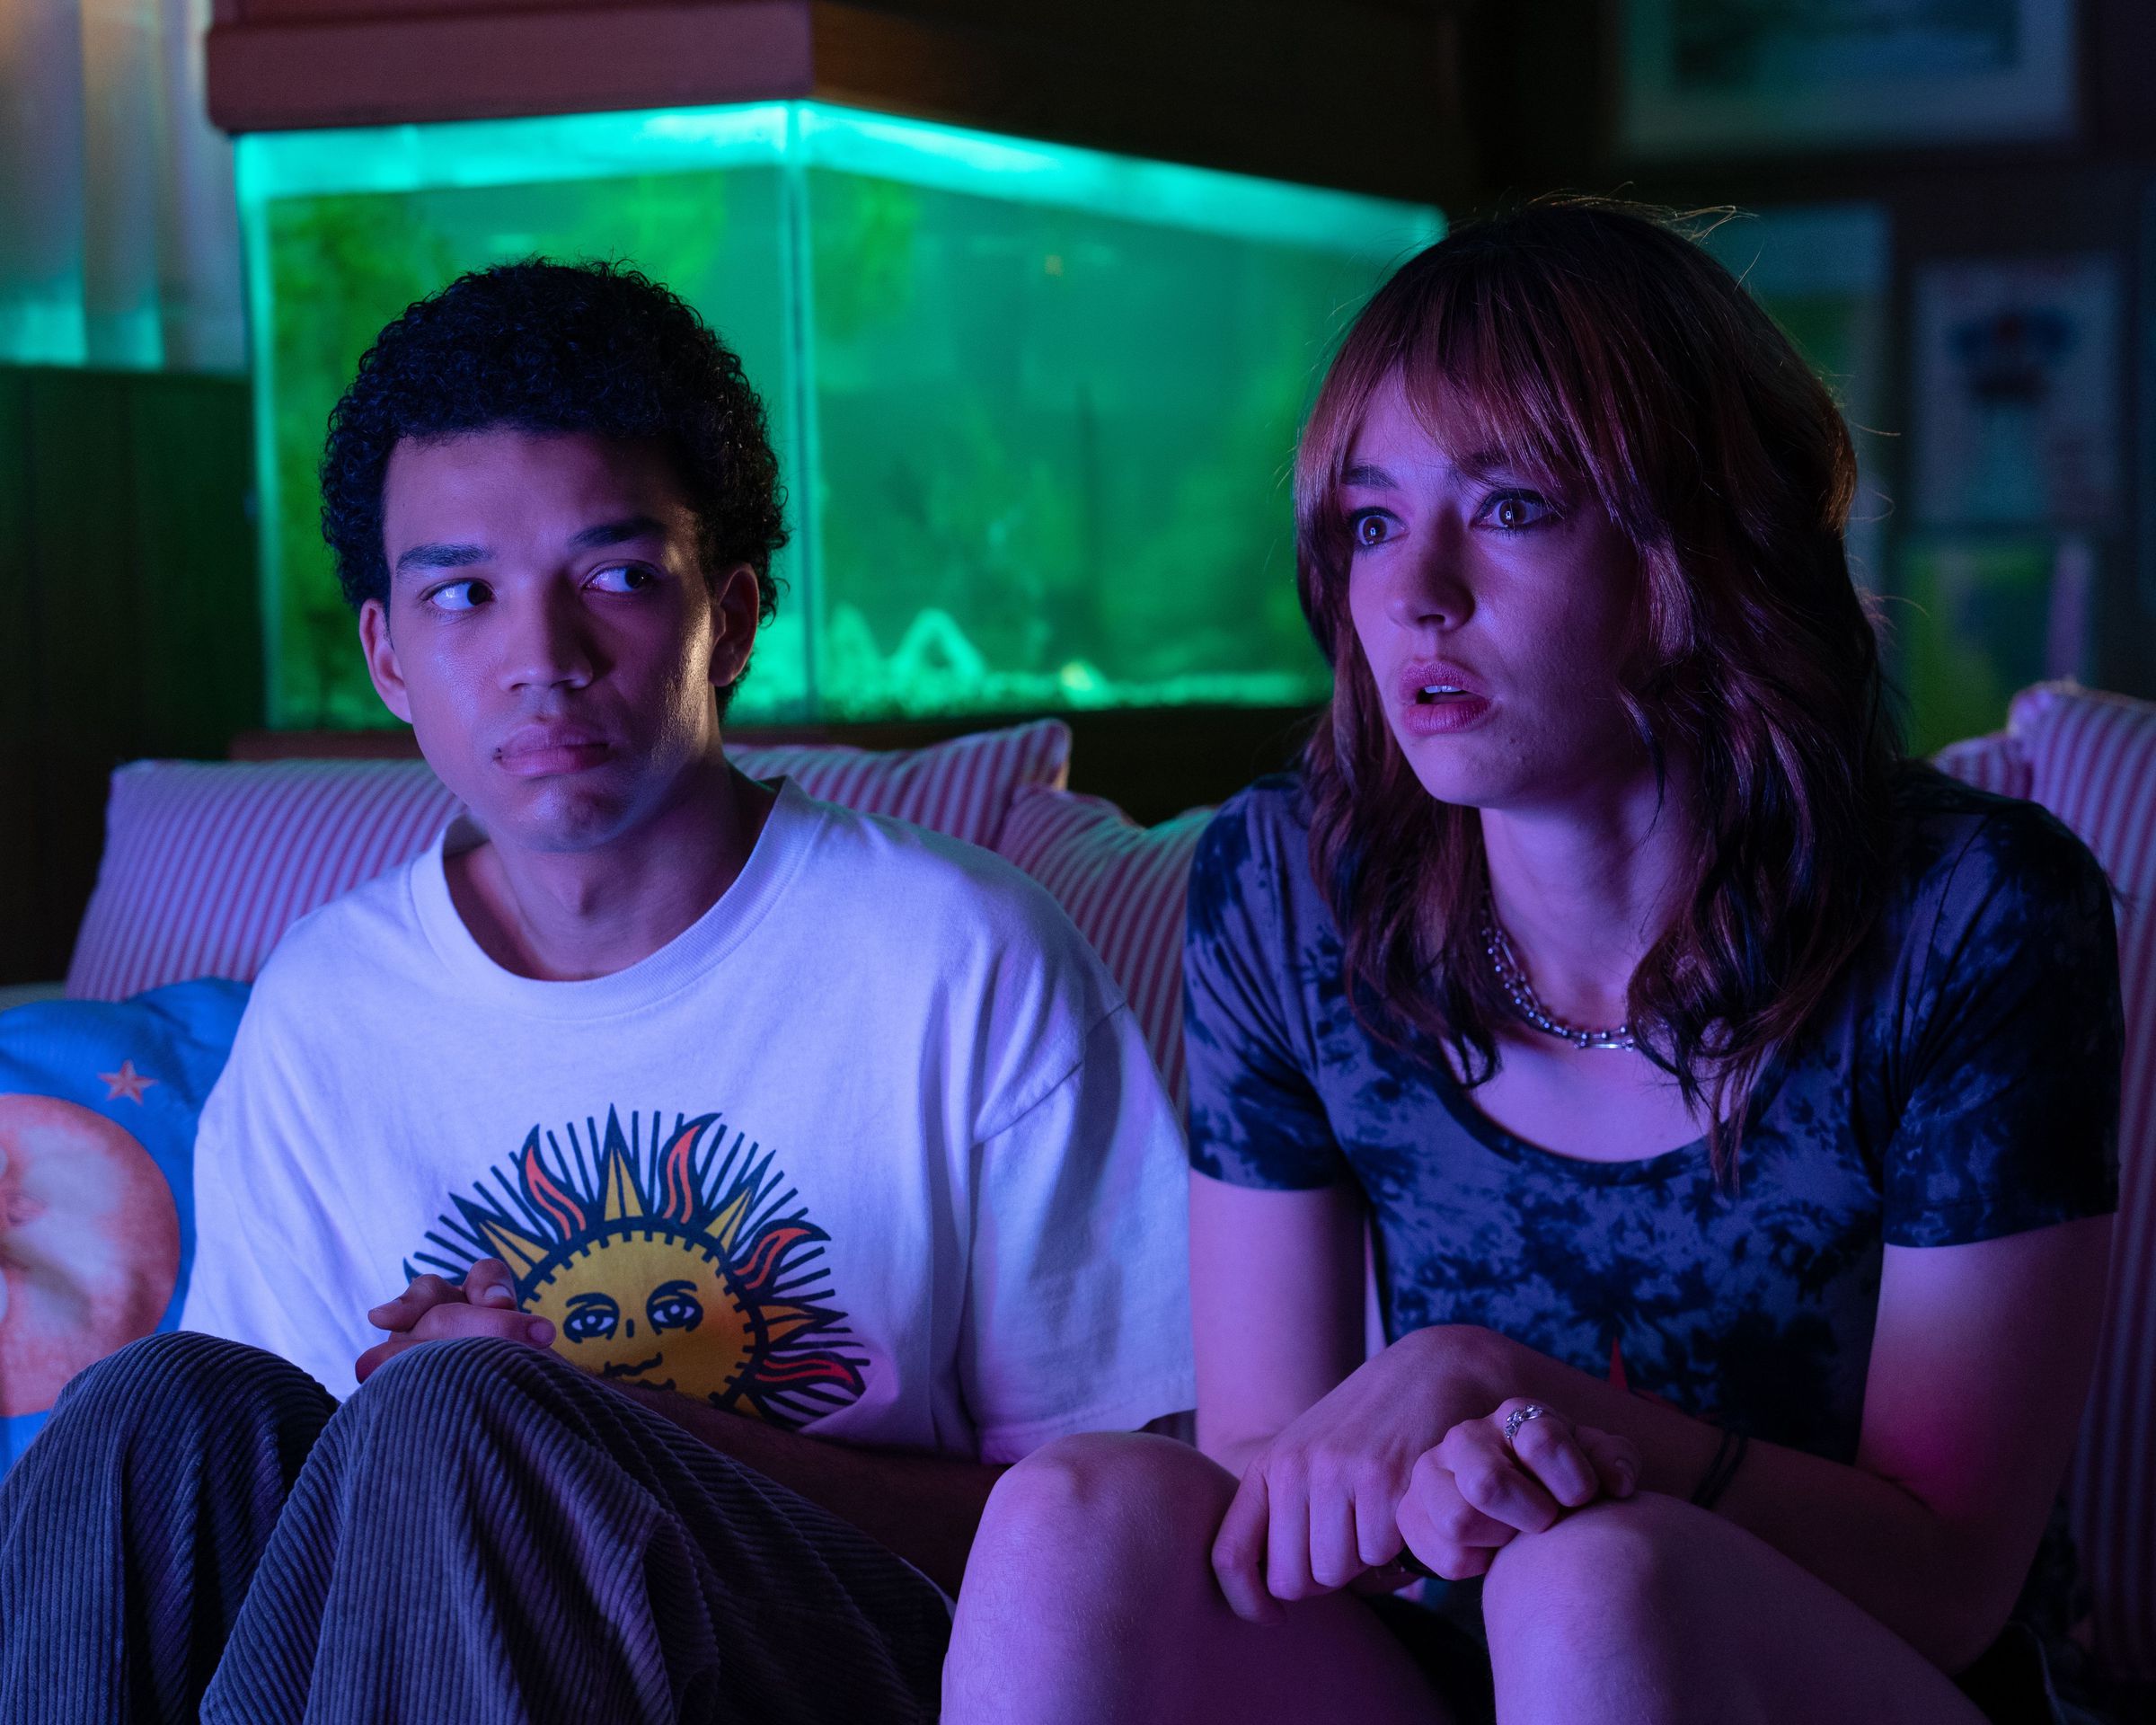 A young man in a t-shirt and pajama bottoms sitting next to a young woman in a t-shirt and shorts. The pair are sitting on a couch in front of a glowing television, behind them stands a fish tank.